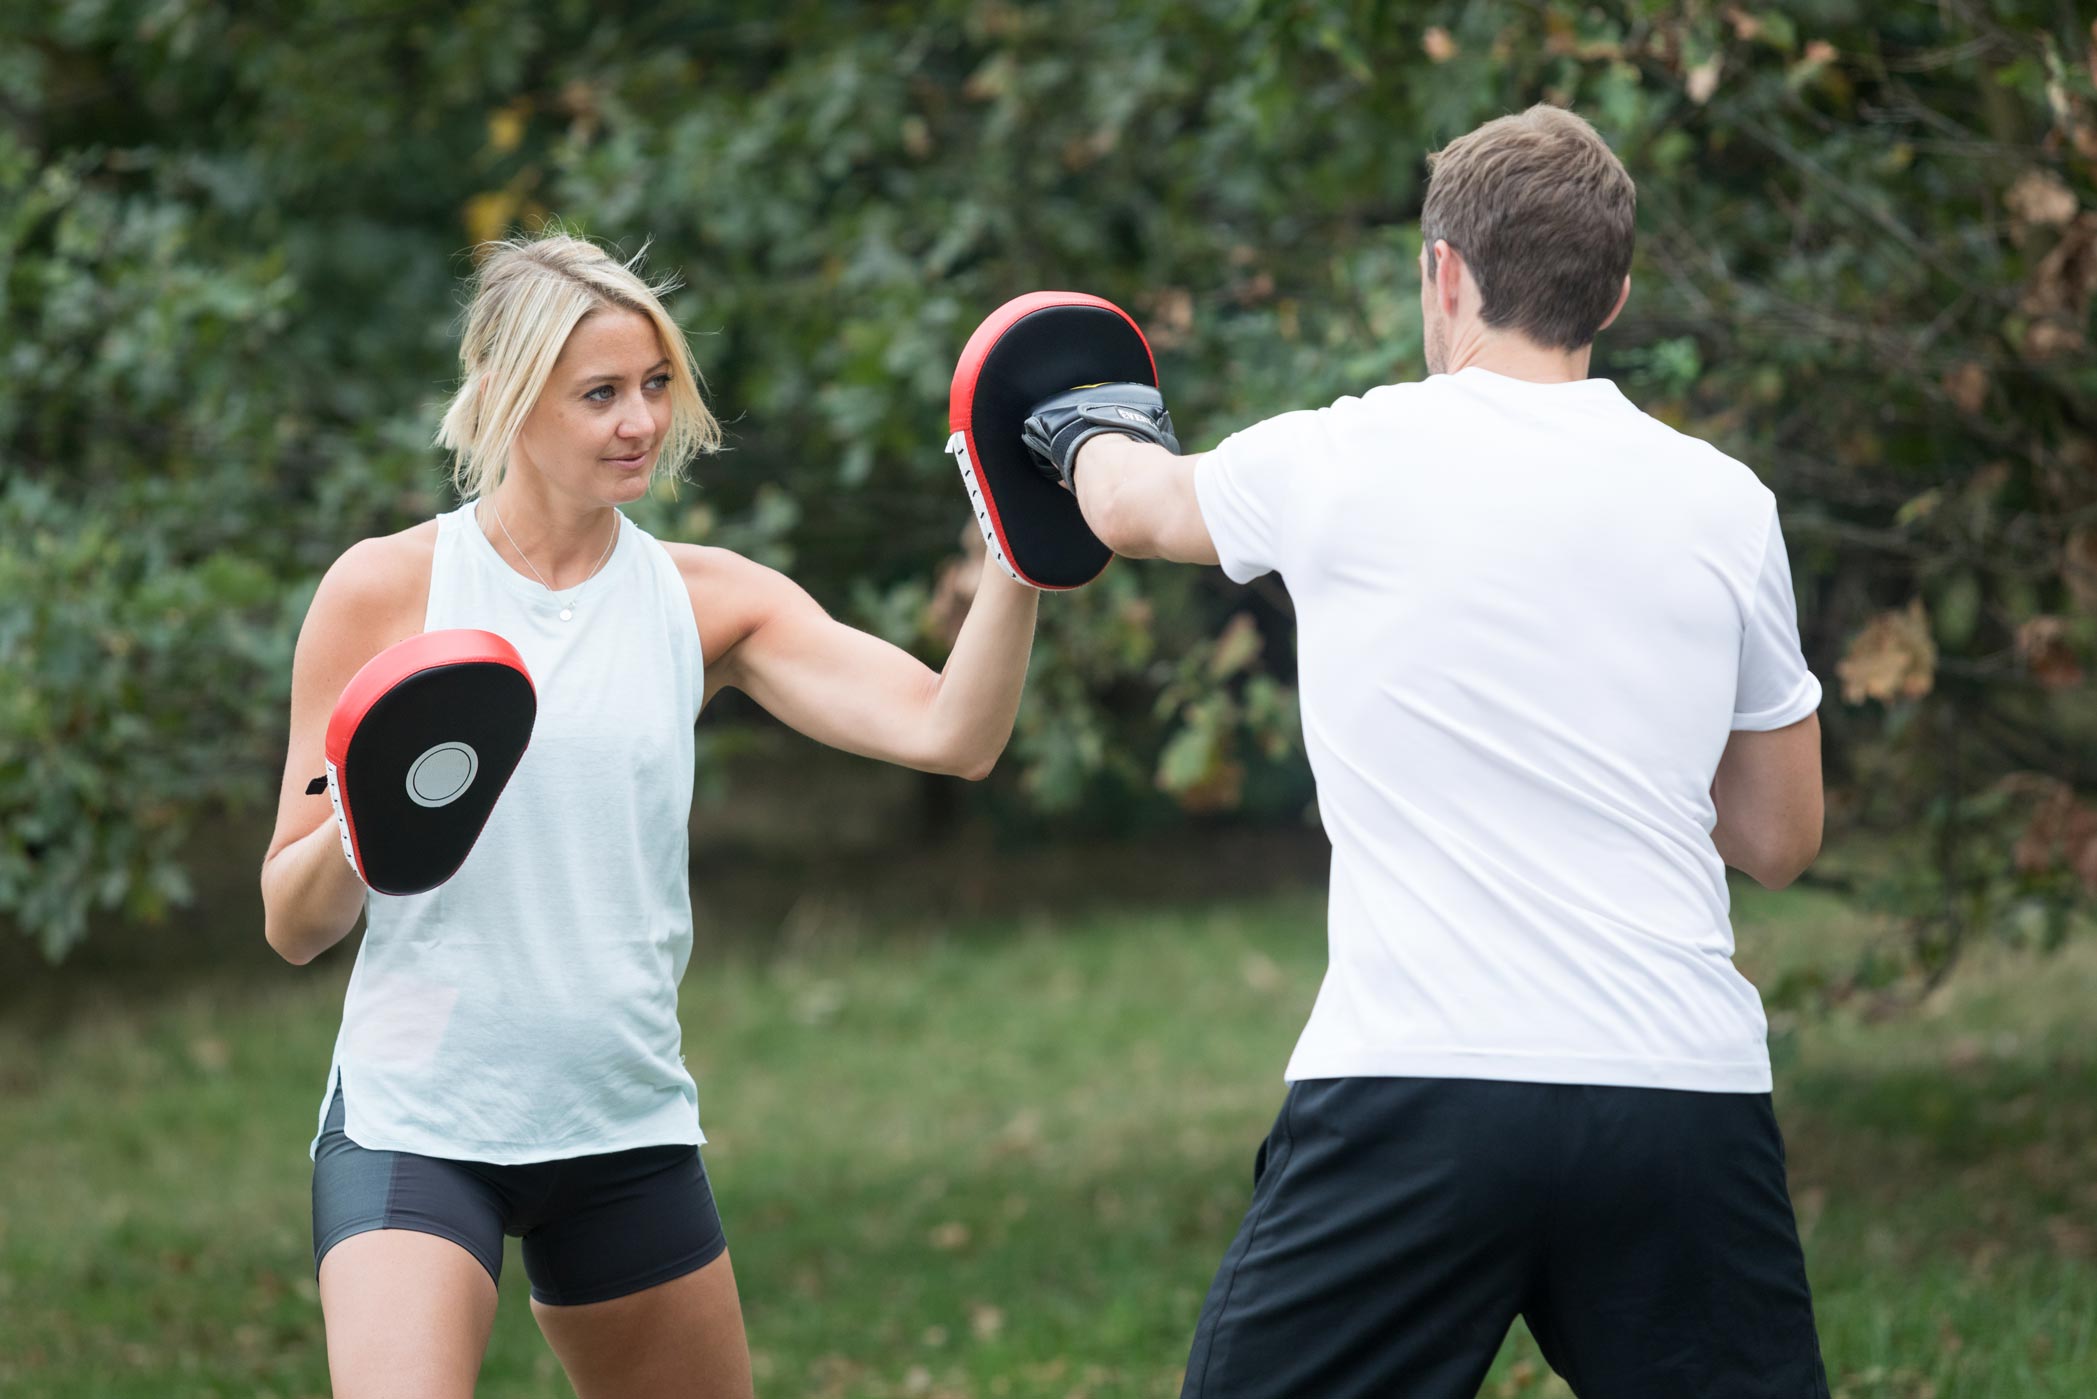 A female personal trainer practices boxing with a client during a health & fitness personal branding photography shoot in Croydon, London